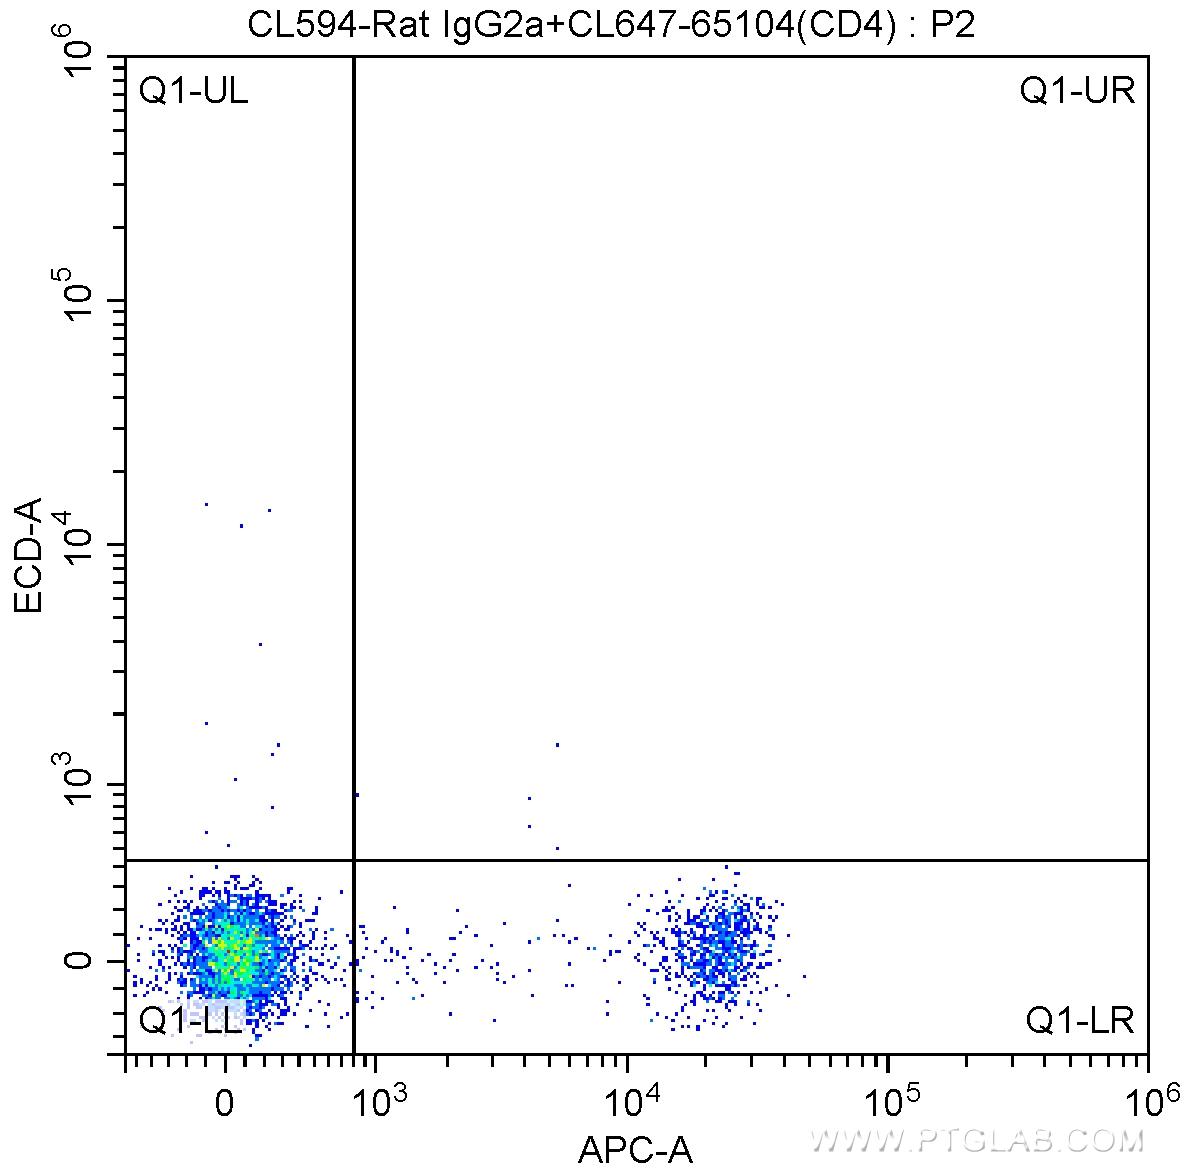 1X10^6 mouse splenocytes were surface stained with CoraLite®647-conjugated Anti-Mouse CD4 (CL647-65104, Clone: GK1.5) and CoraLite®594-conjugated Rat IgG2a isotype control antibody. Cells were not fixed.